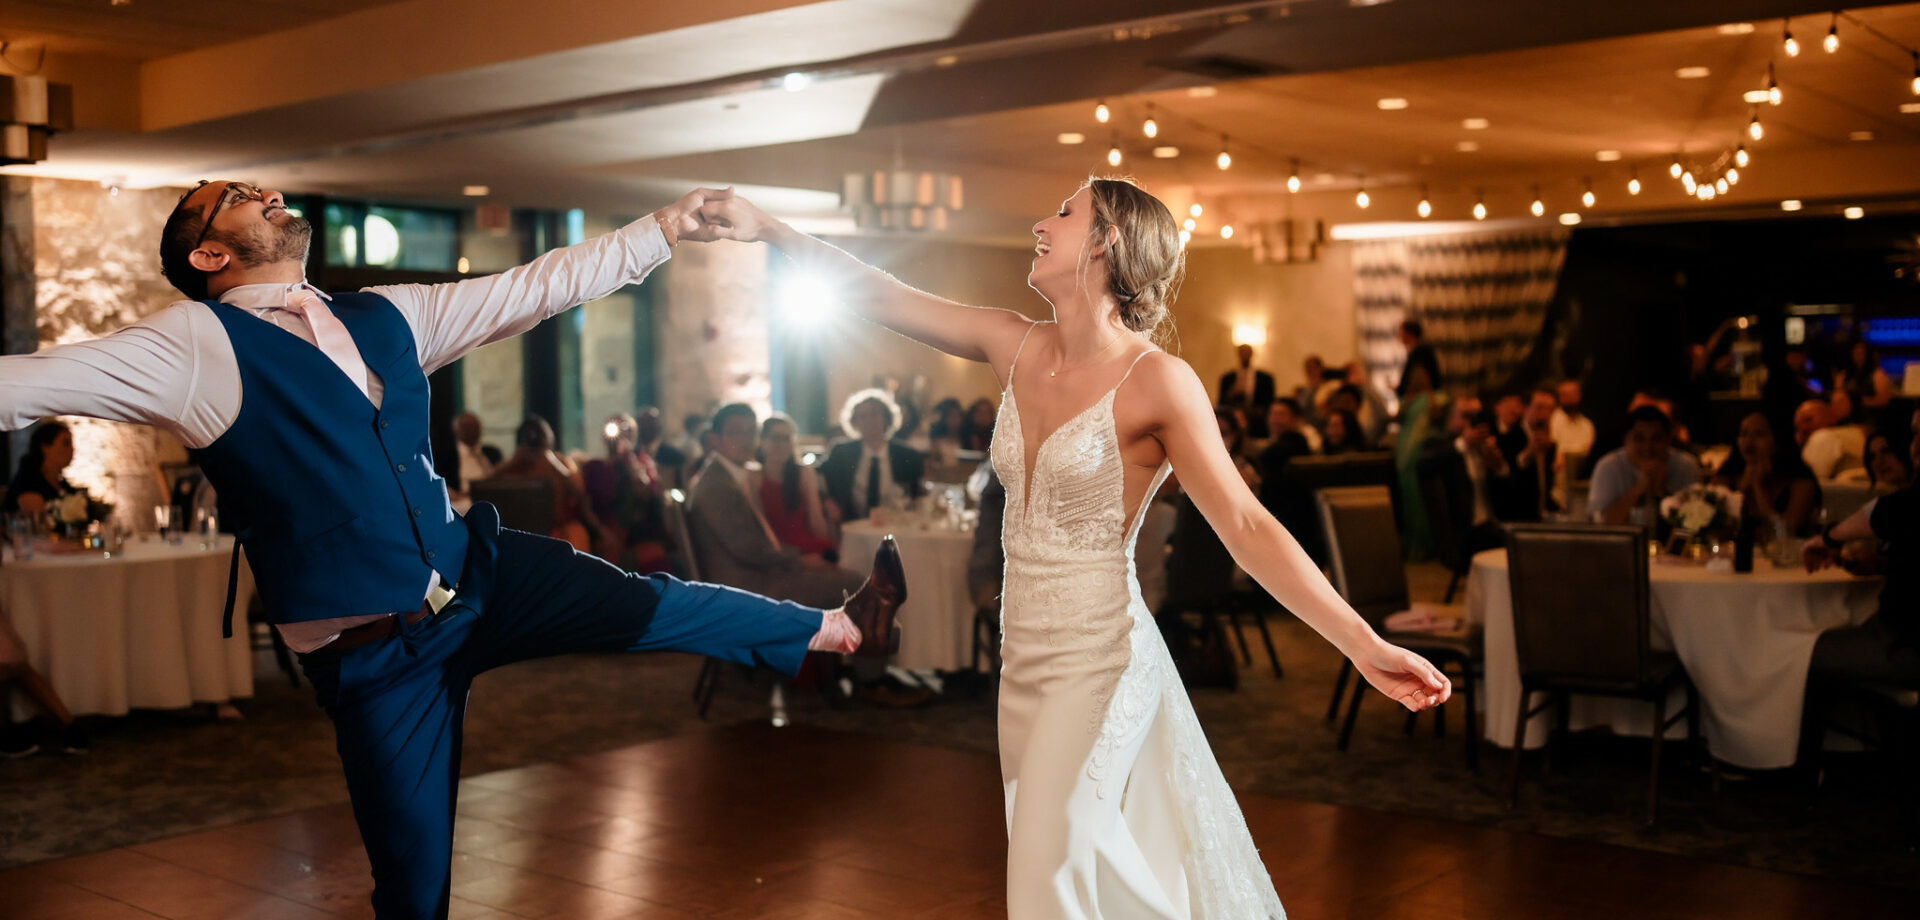 Bride twirling groom during first dance